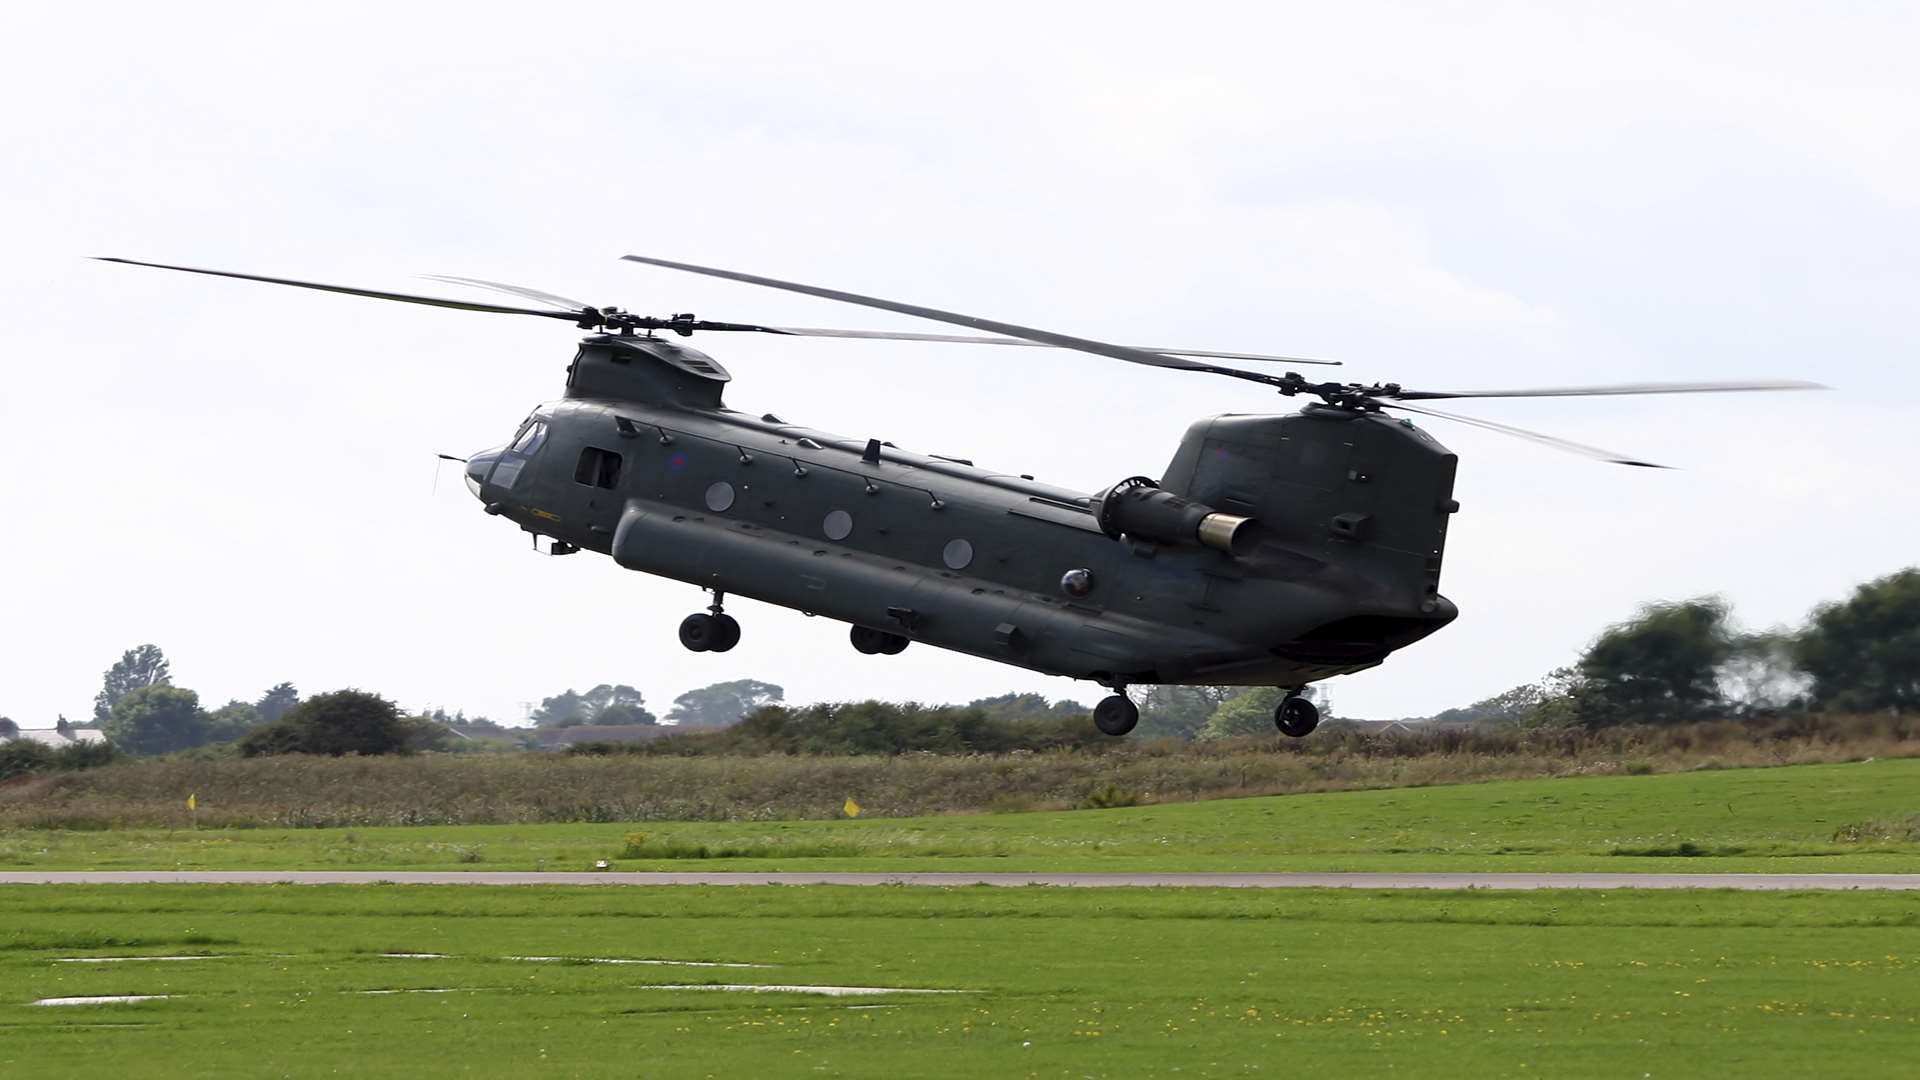 A chinook helicopter hovering over an airfield.